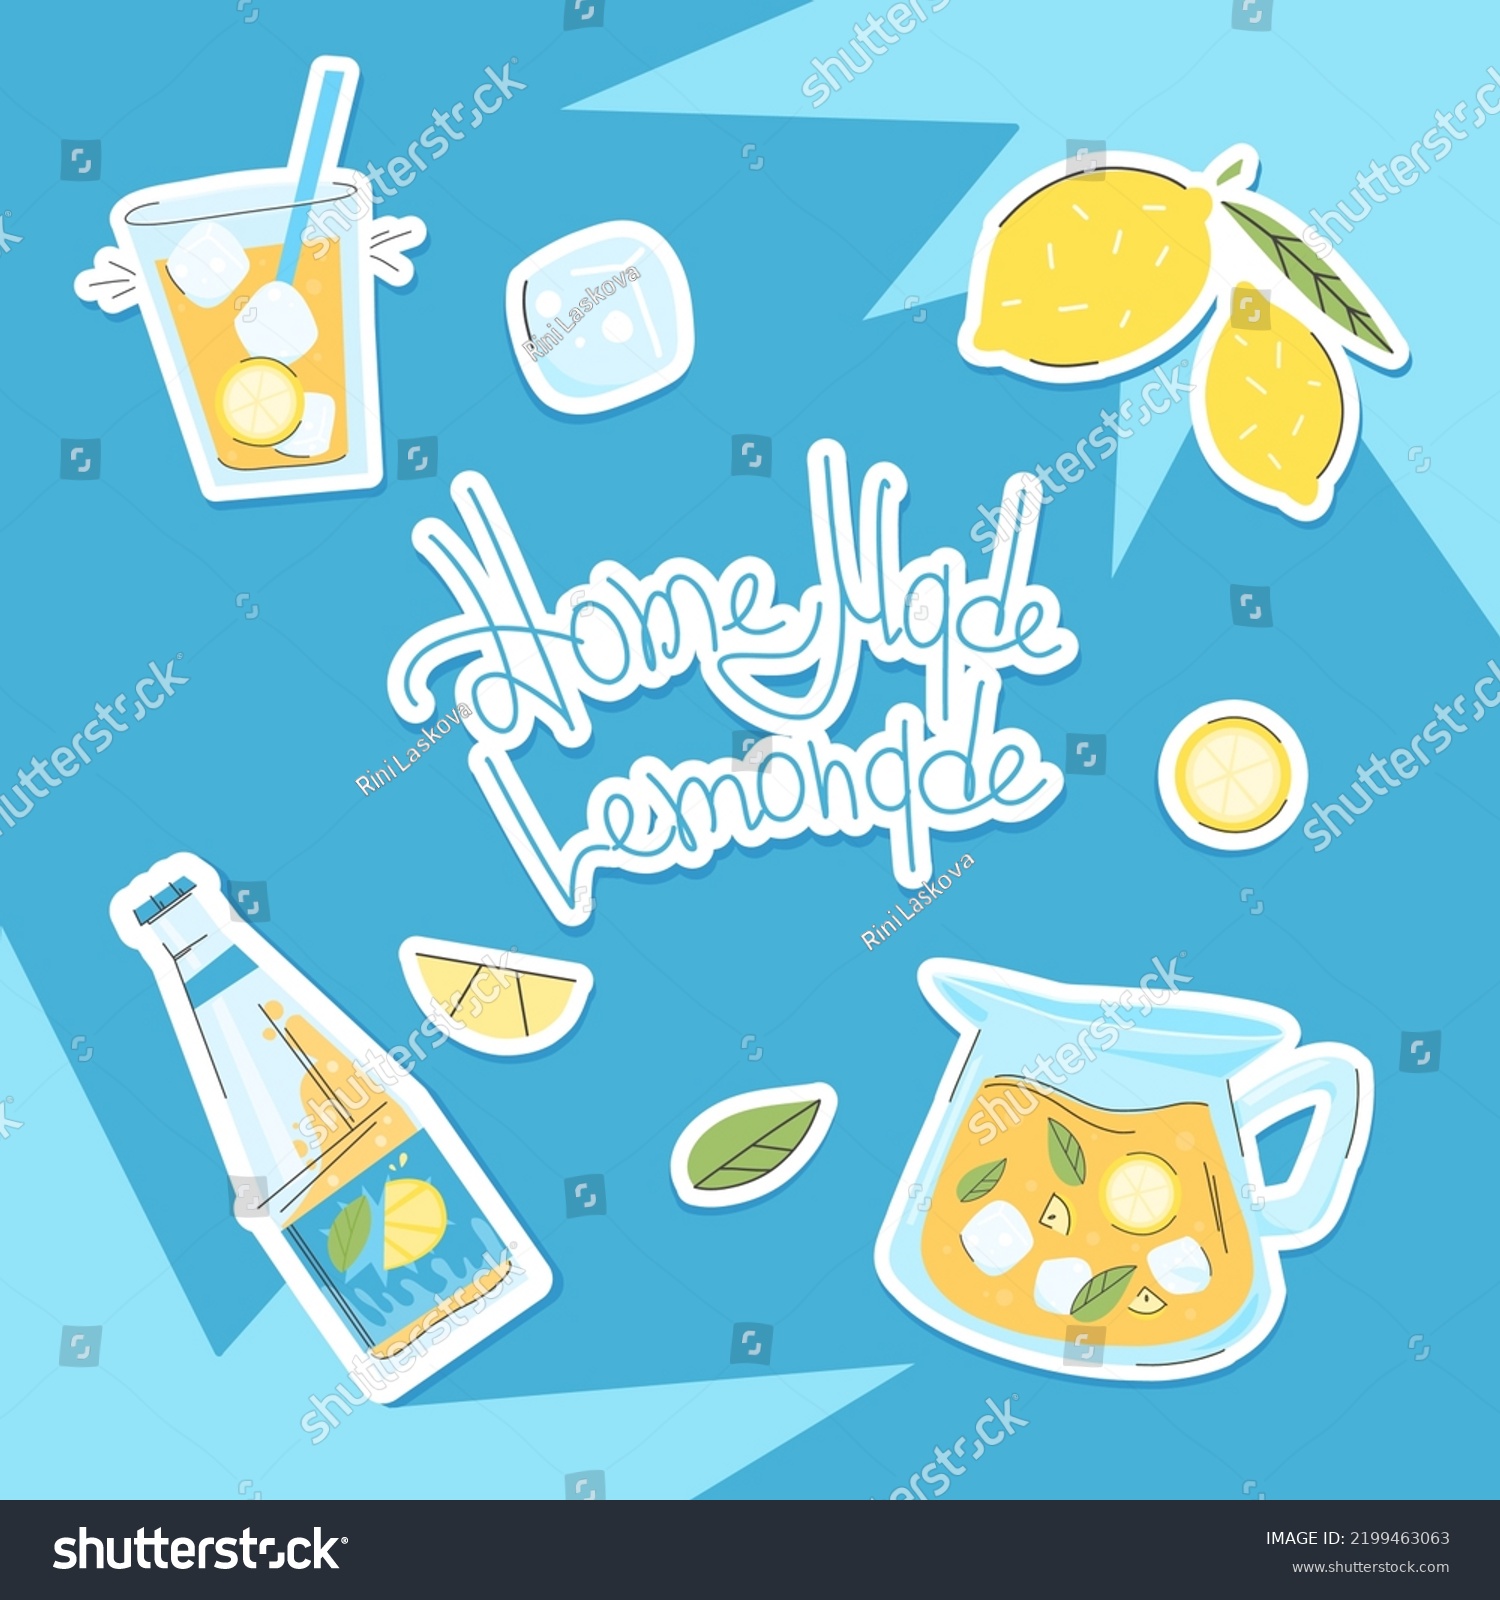 Sticker set of homemade lemonade on a blue background. Illustrations of a lemonade bottle, glasses, lemons and a decanter with a cutout outline. #2199463063